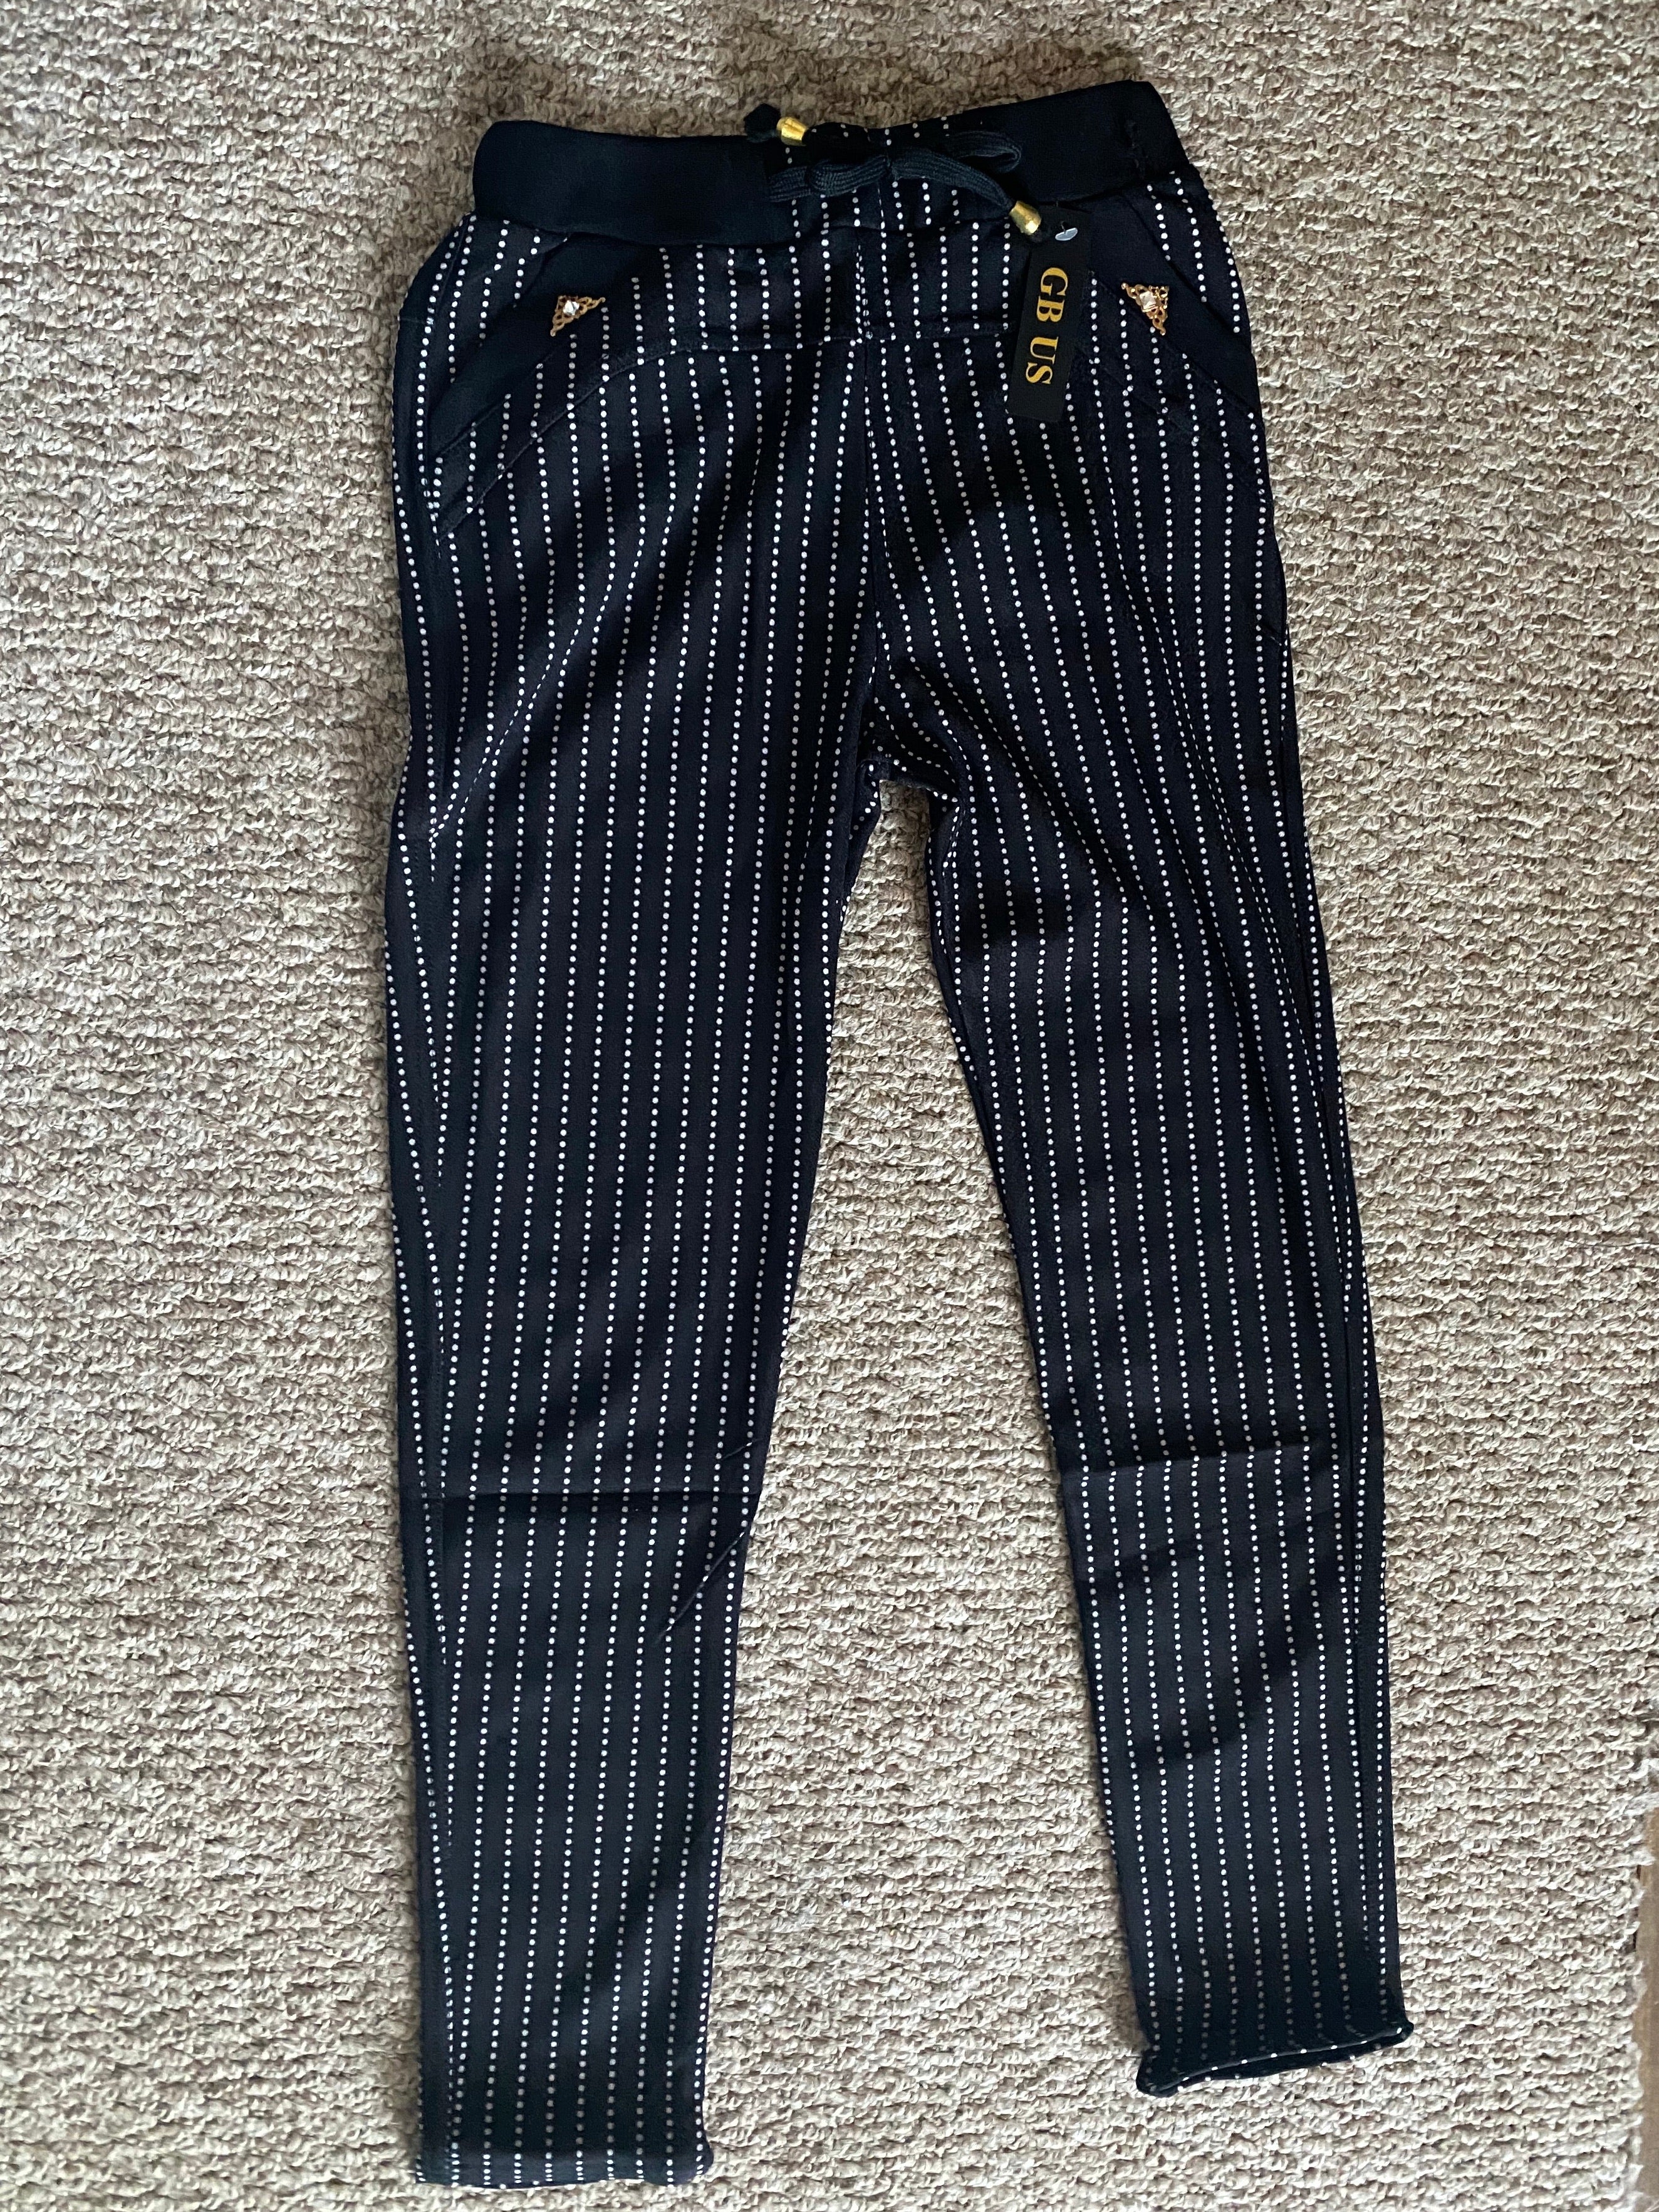 Bottom - Next To Me Striped with Gold Accents (S/M, M/L)